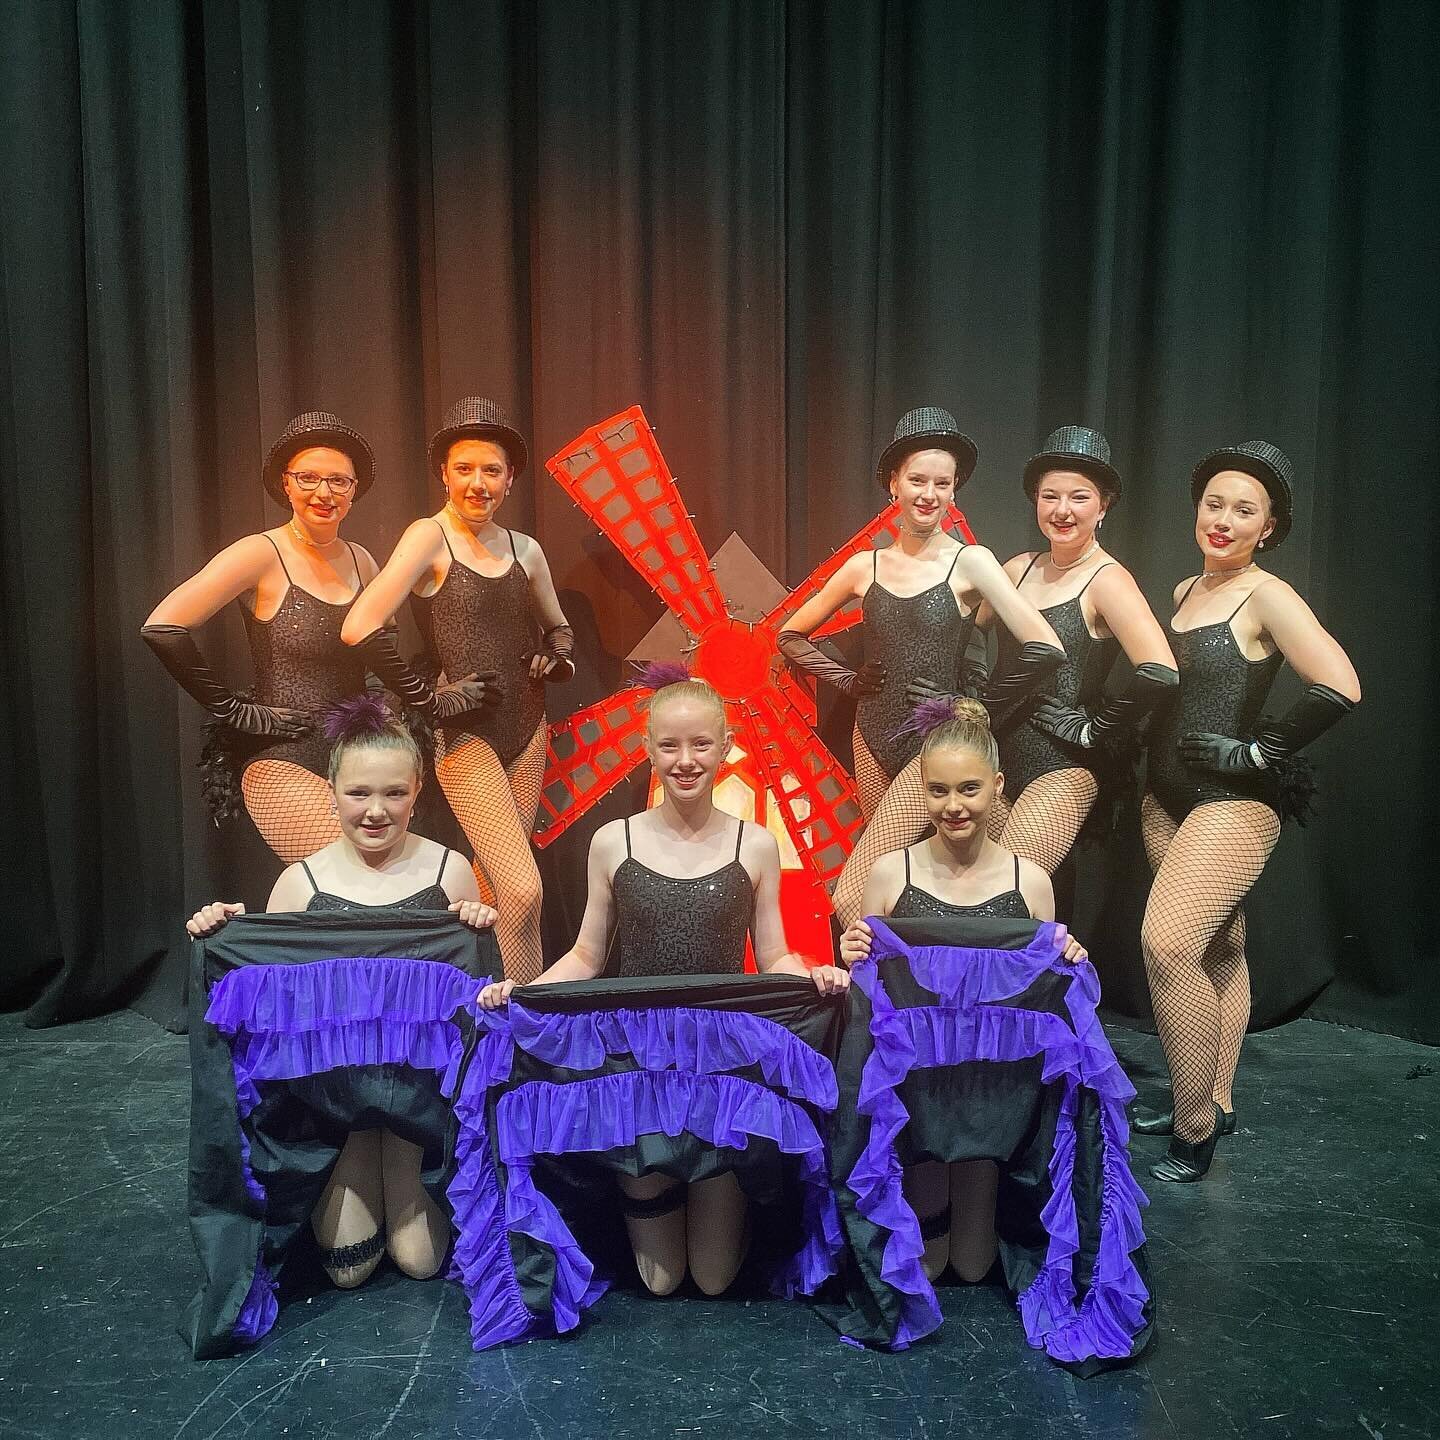 Yesterday we wrapped up our busy concert season with our beautiful Yarram students performing &ldquo;All That Baz!&rdquo; We are so proud of you all! Thank you for all your amazing efforts, thank you to our teachers, backstage and front of house staf